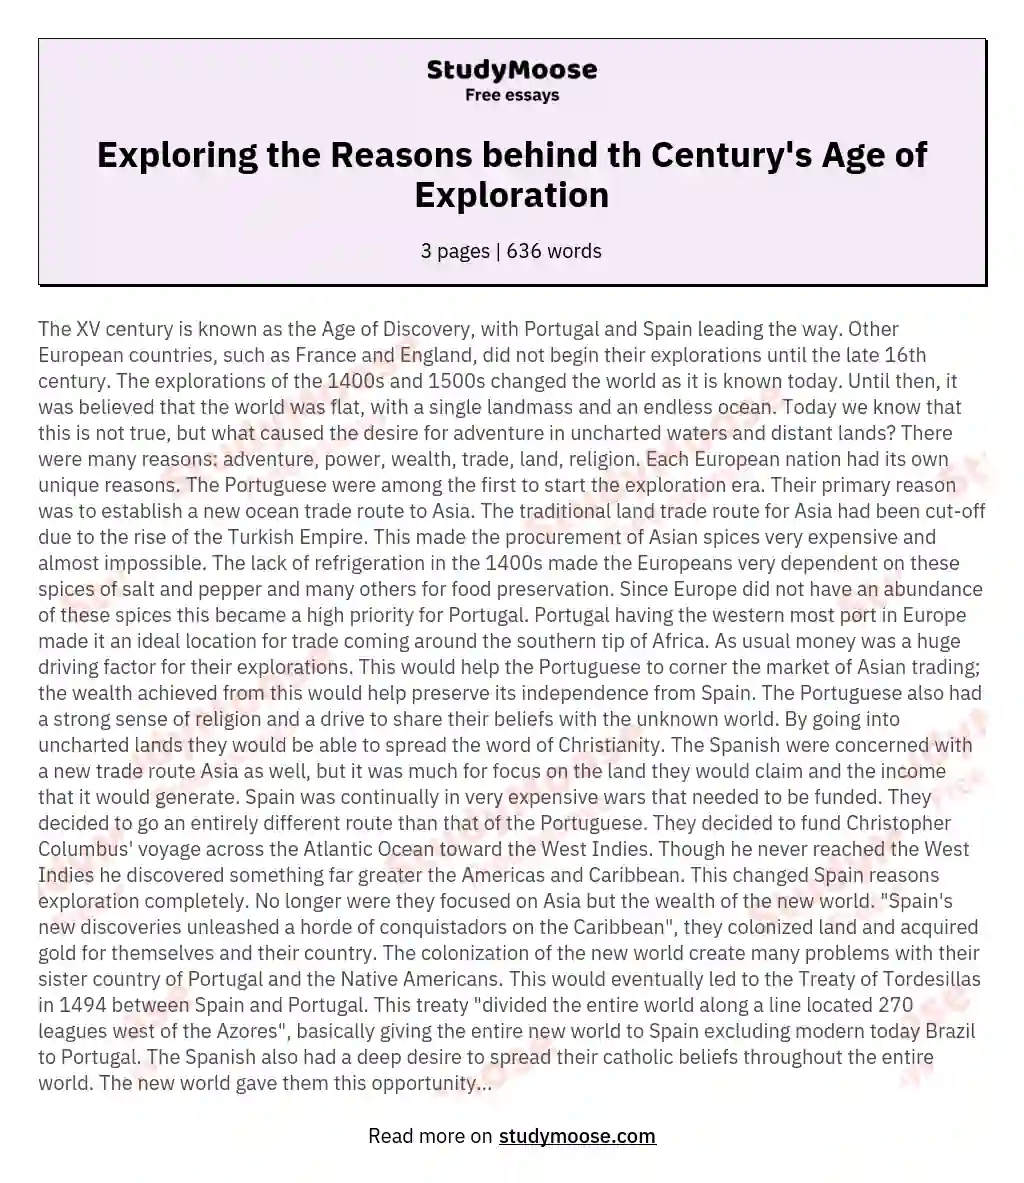 Exploring the Reasons behind th Century's Age of Exploration essay